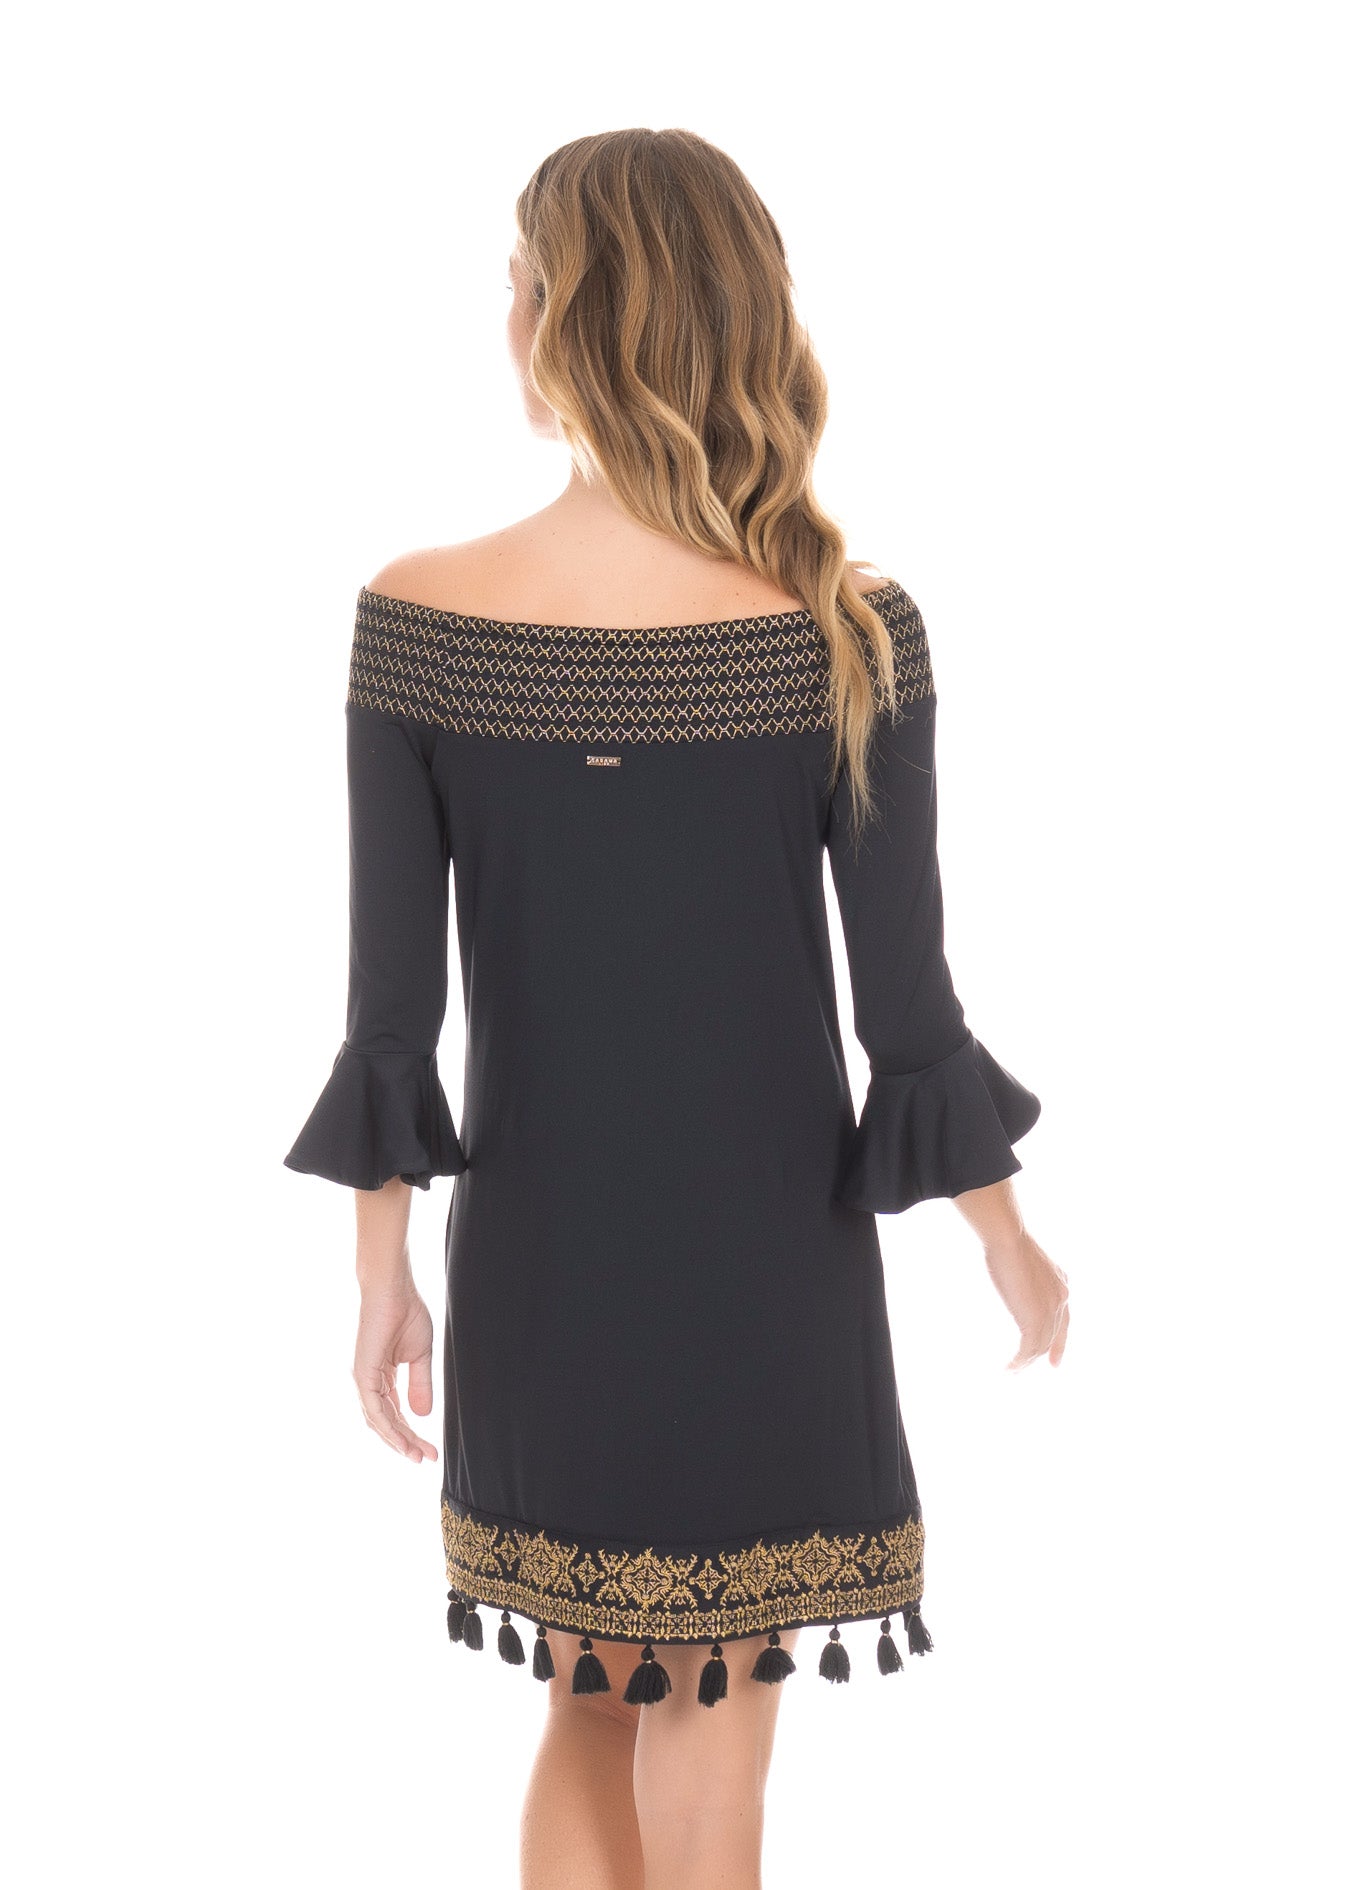 Back of blonde woman wearing the Black/Gold Metallic Embroidered Off The Shoulder Dress in front of white background.